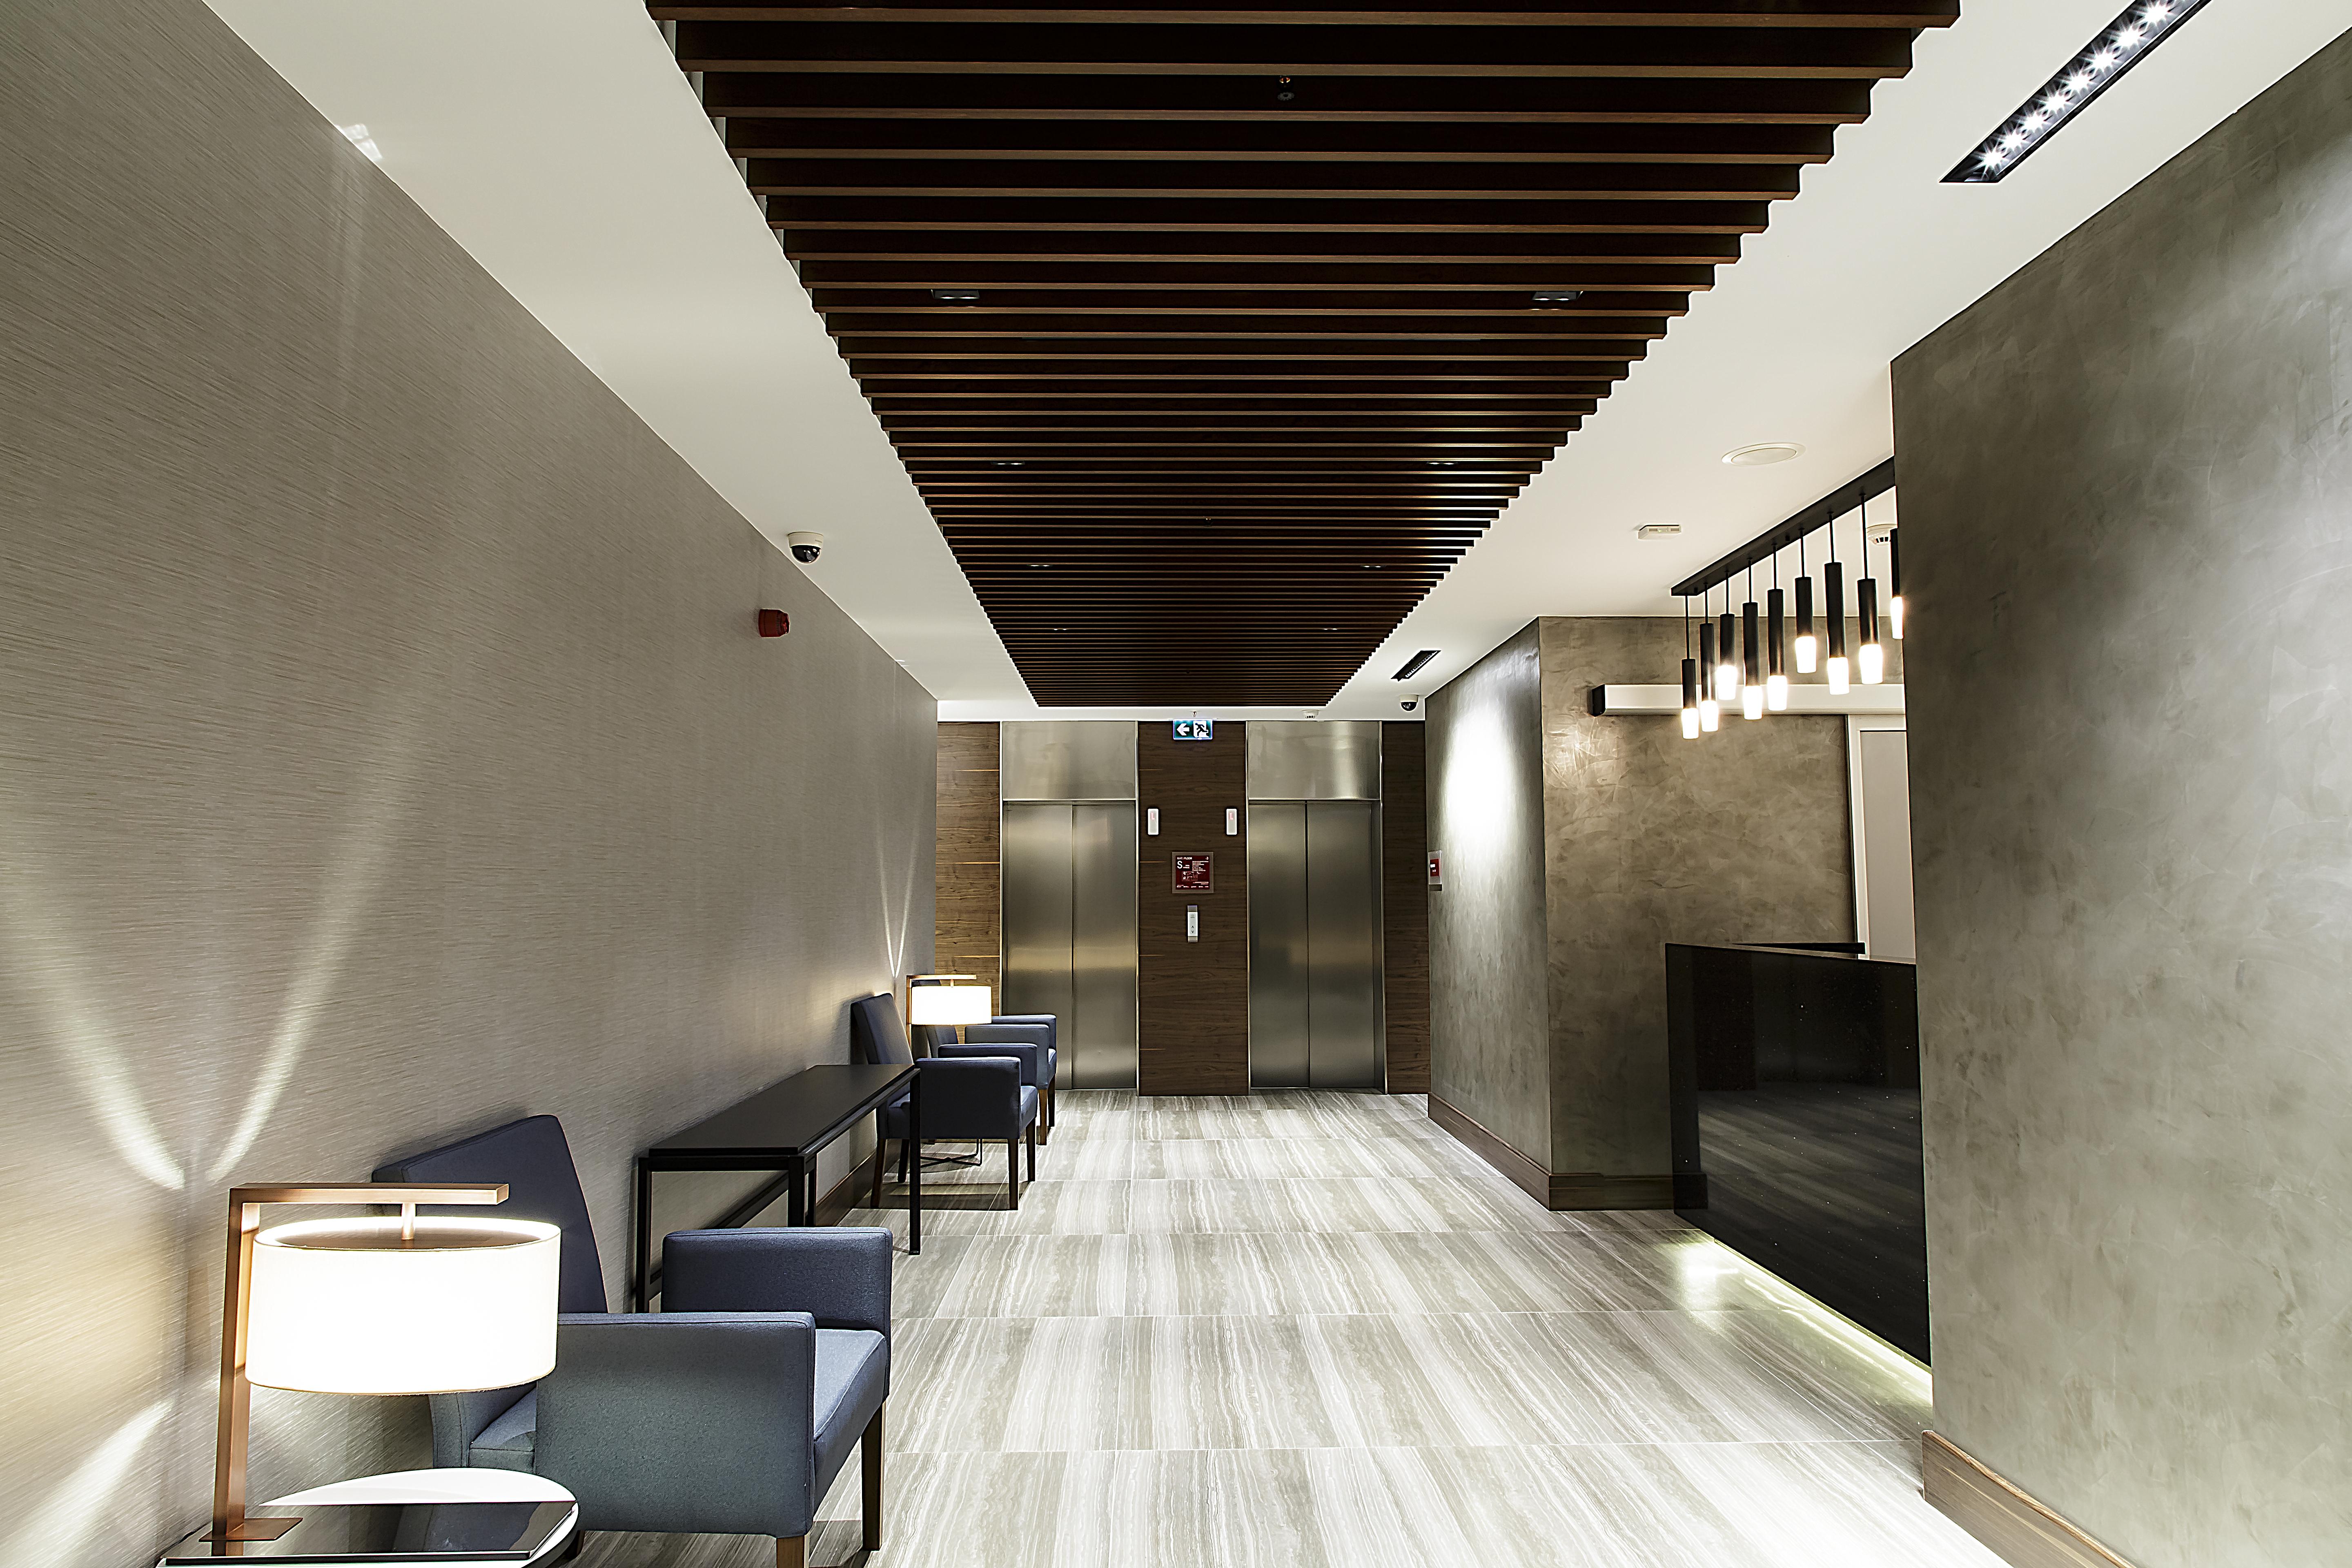 Bof Hotels Business Istanbul Exterior photo